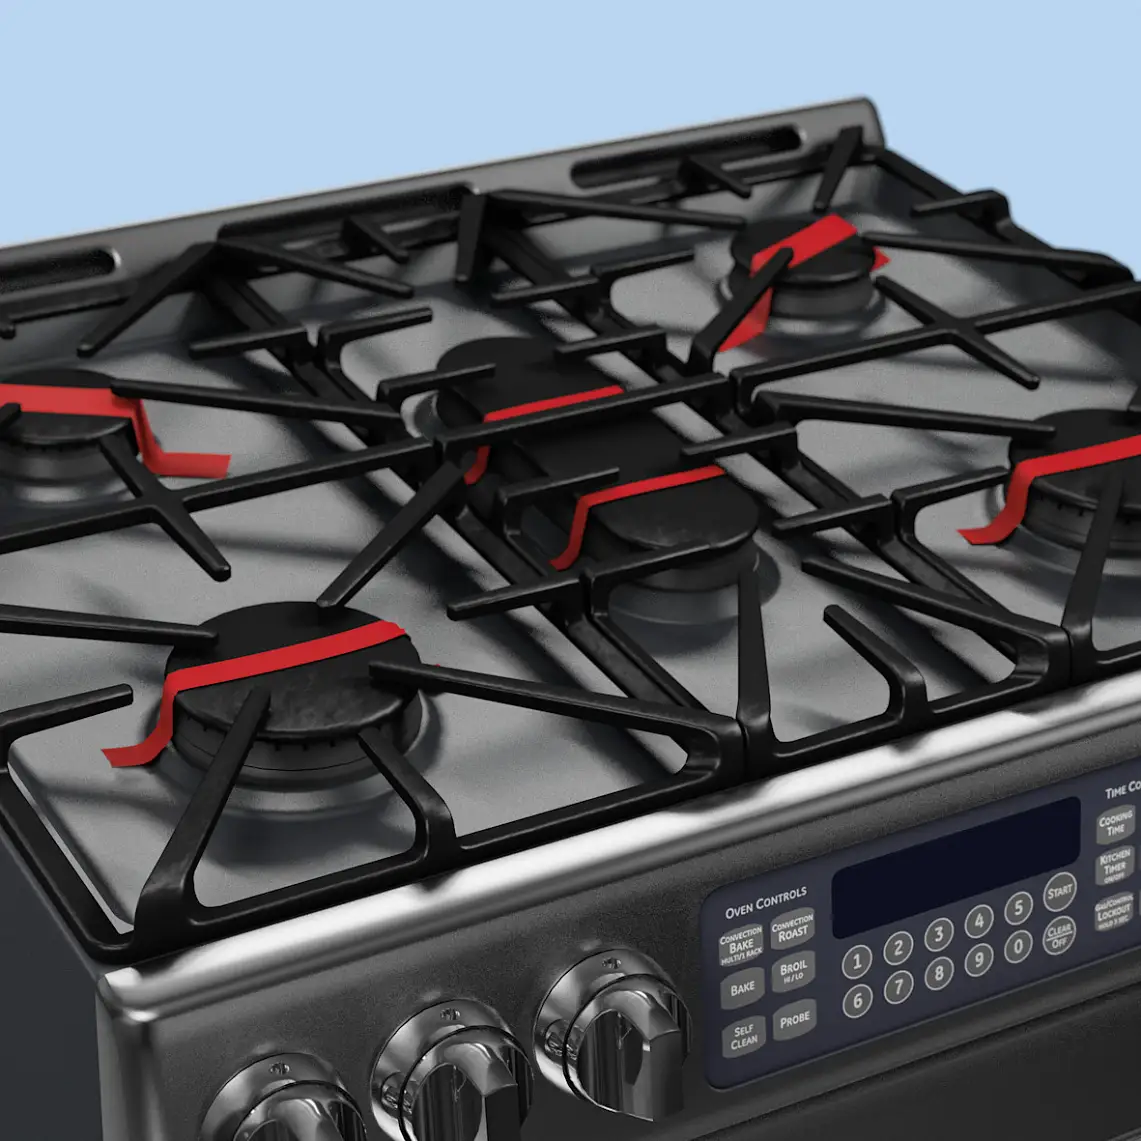 During transport the metal cooktop is kept in place by using adhesive tape.